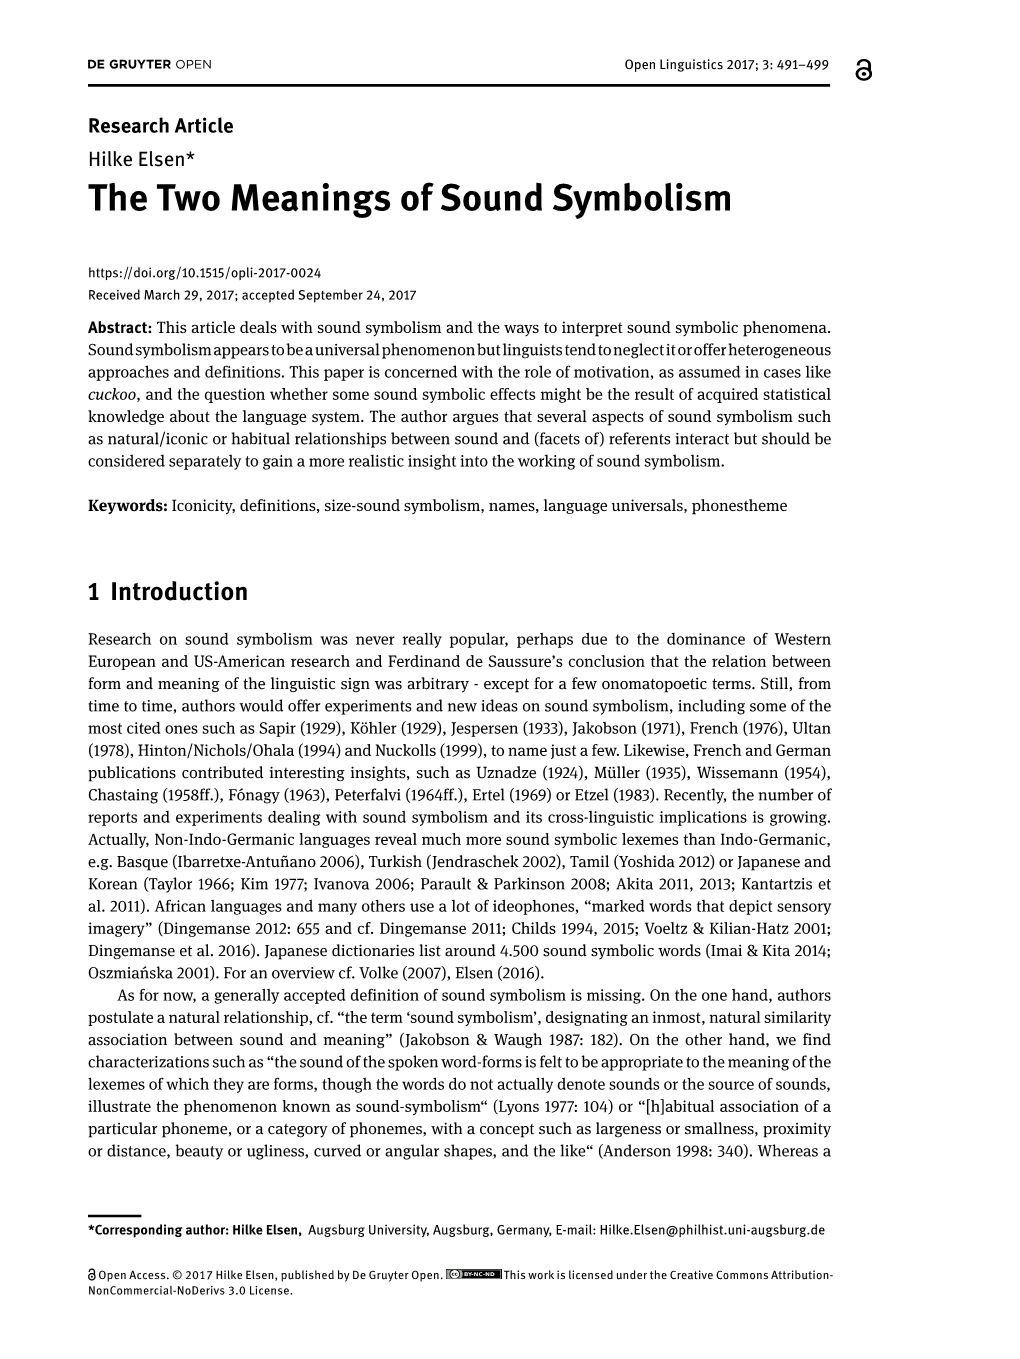 The Two Meanings of Sound Symbolism